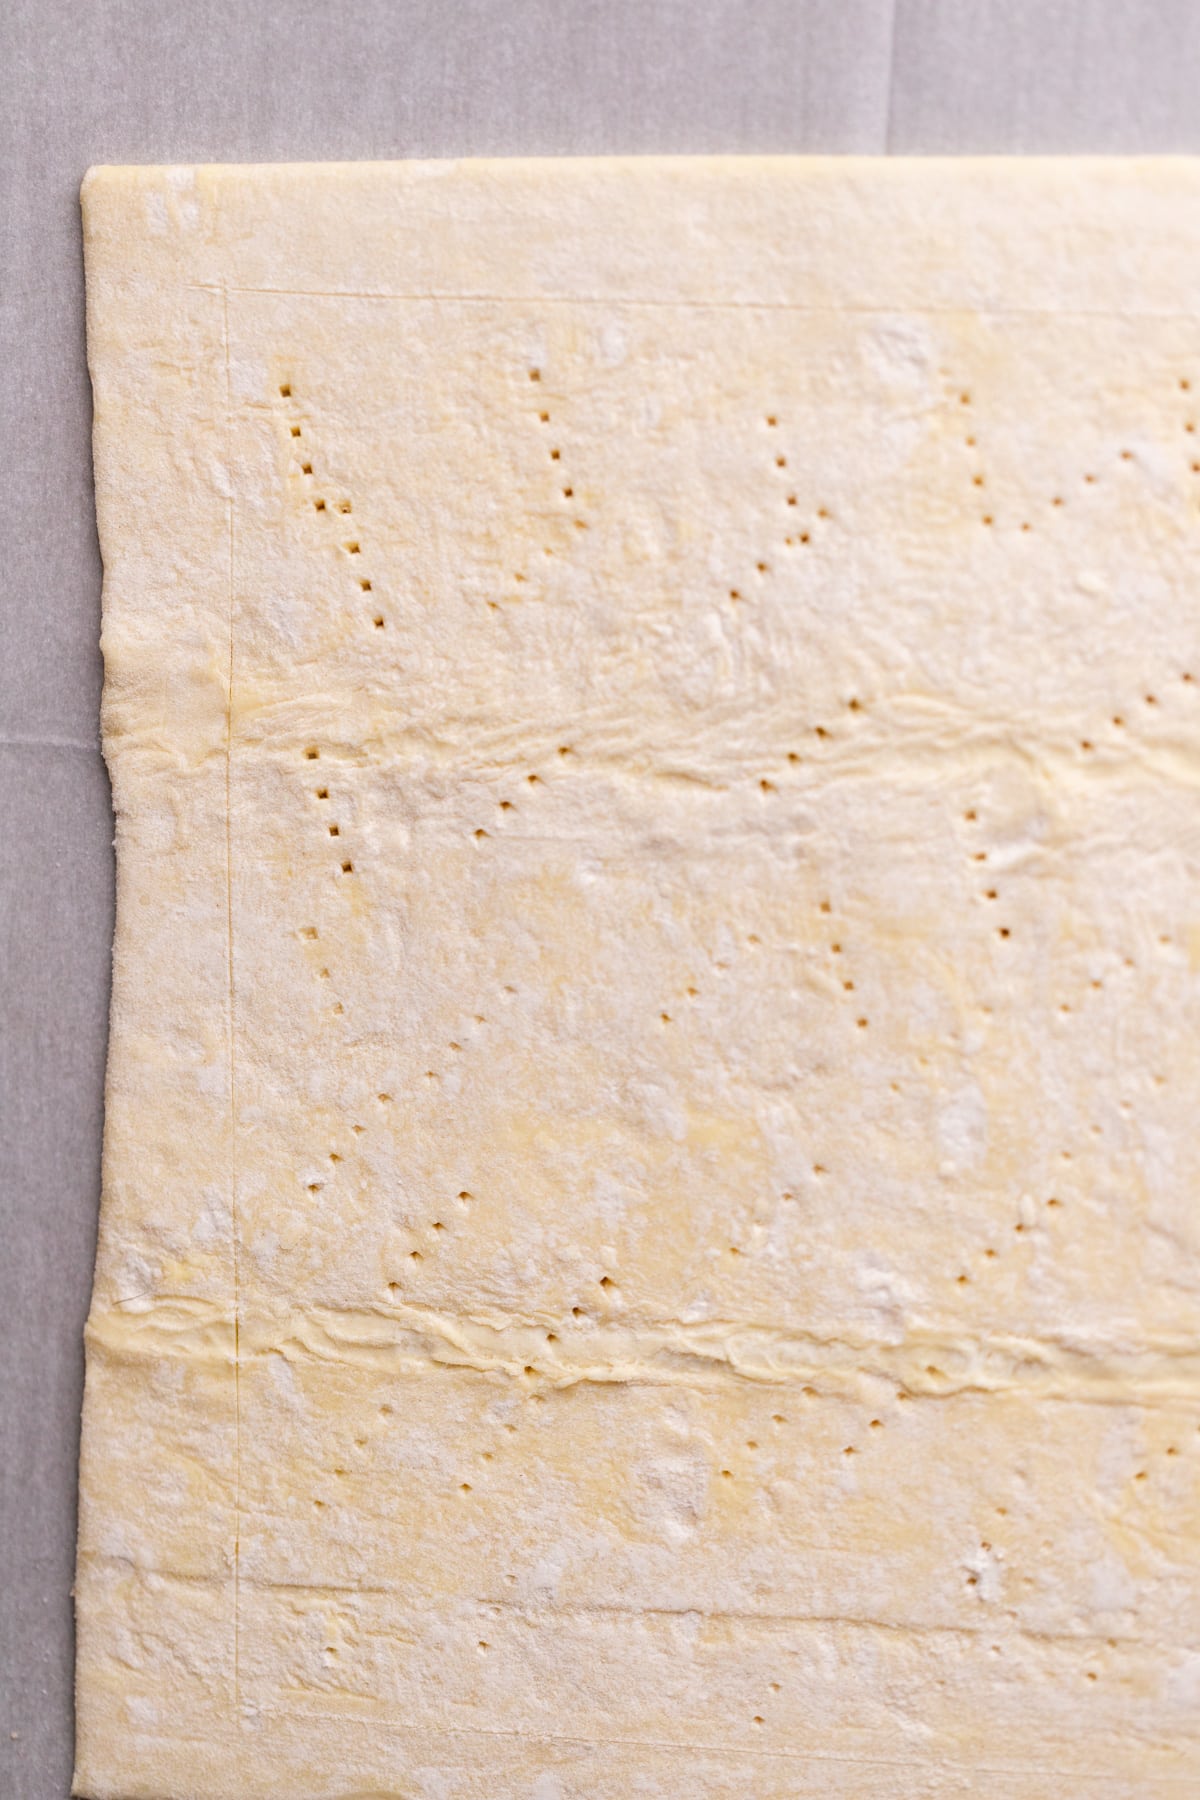 Puff pastry on parchment paper.